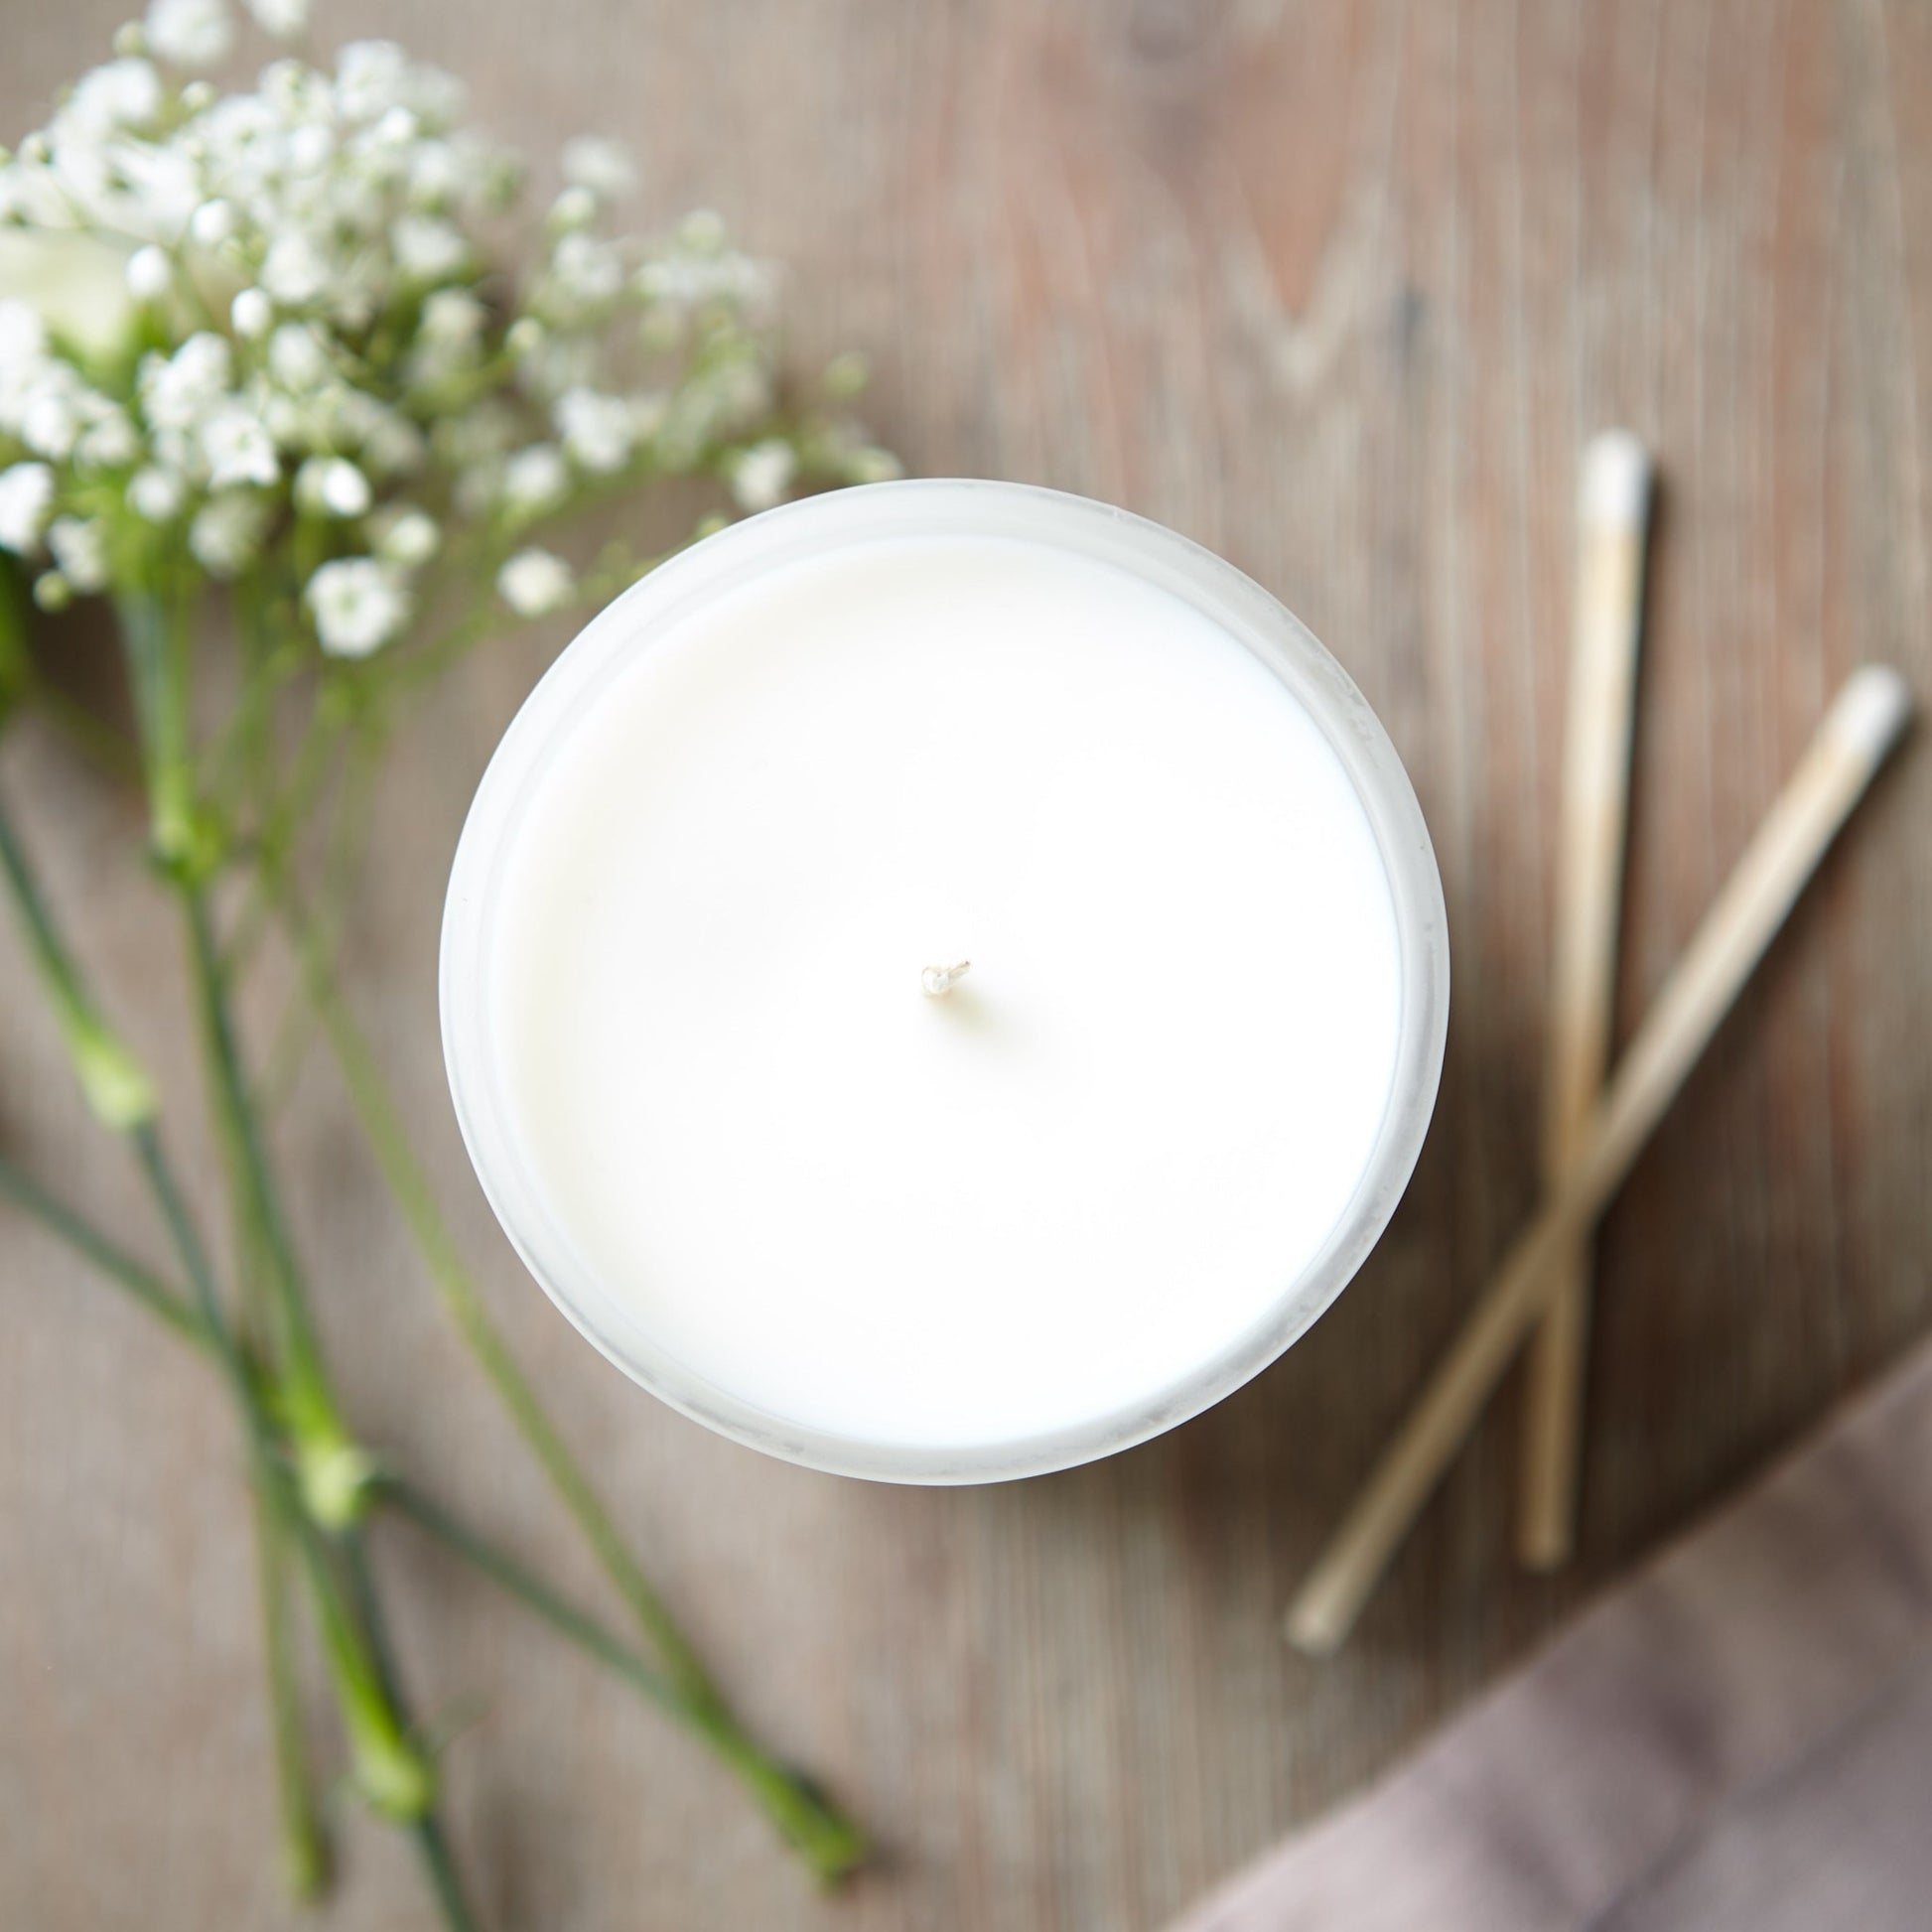 Bridesmaid Gift Botanical Candle - Kindred Fires